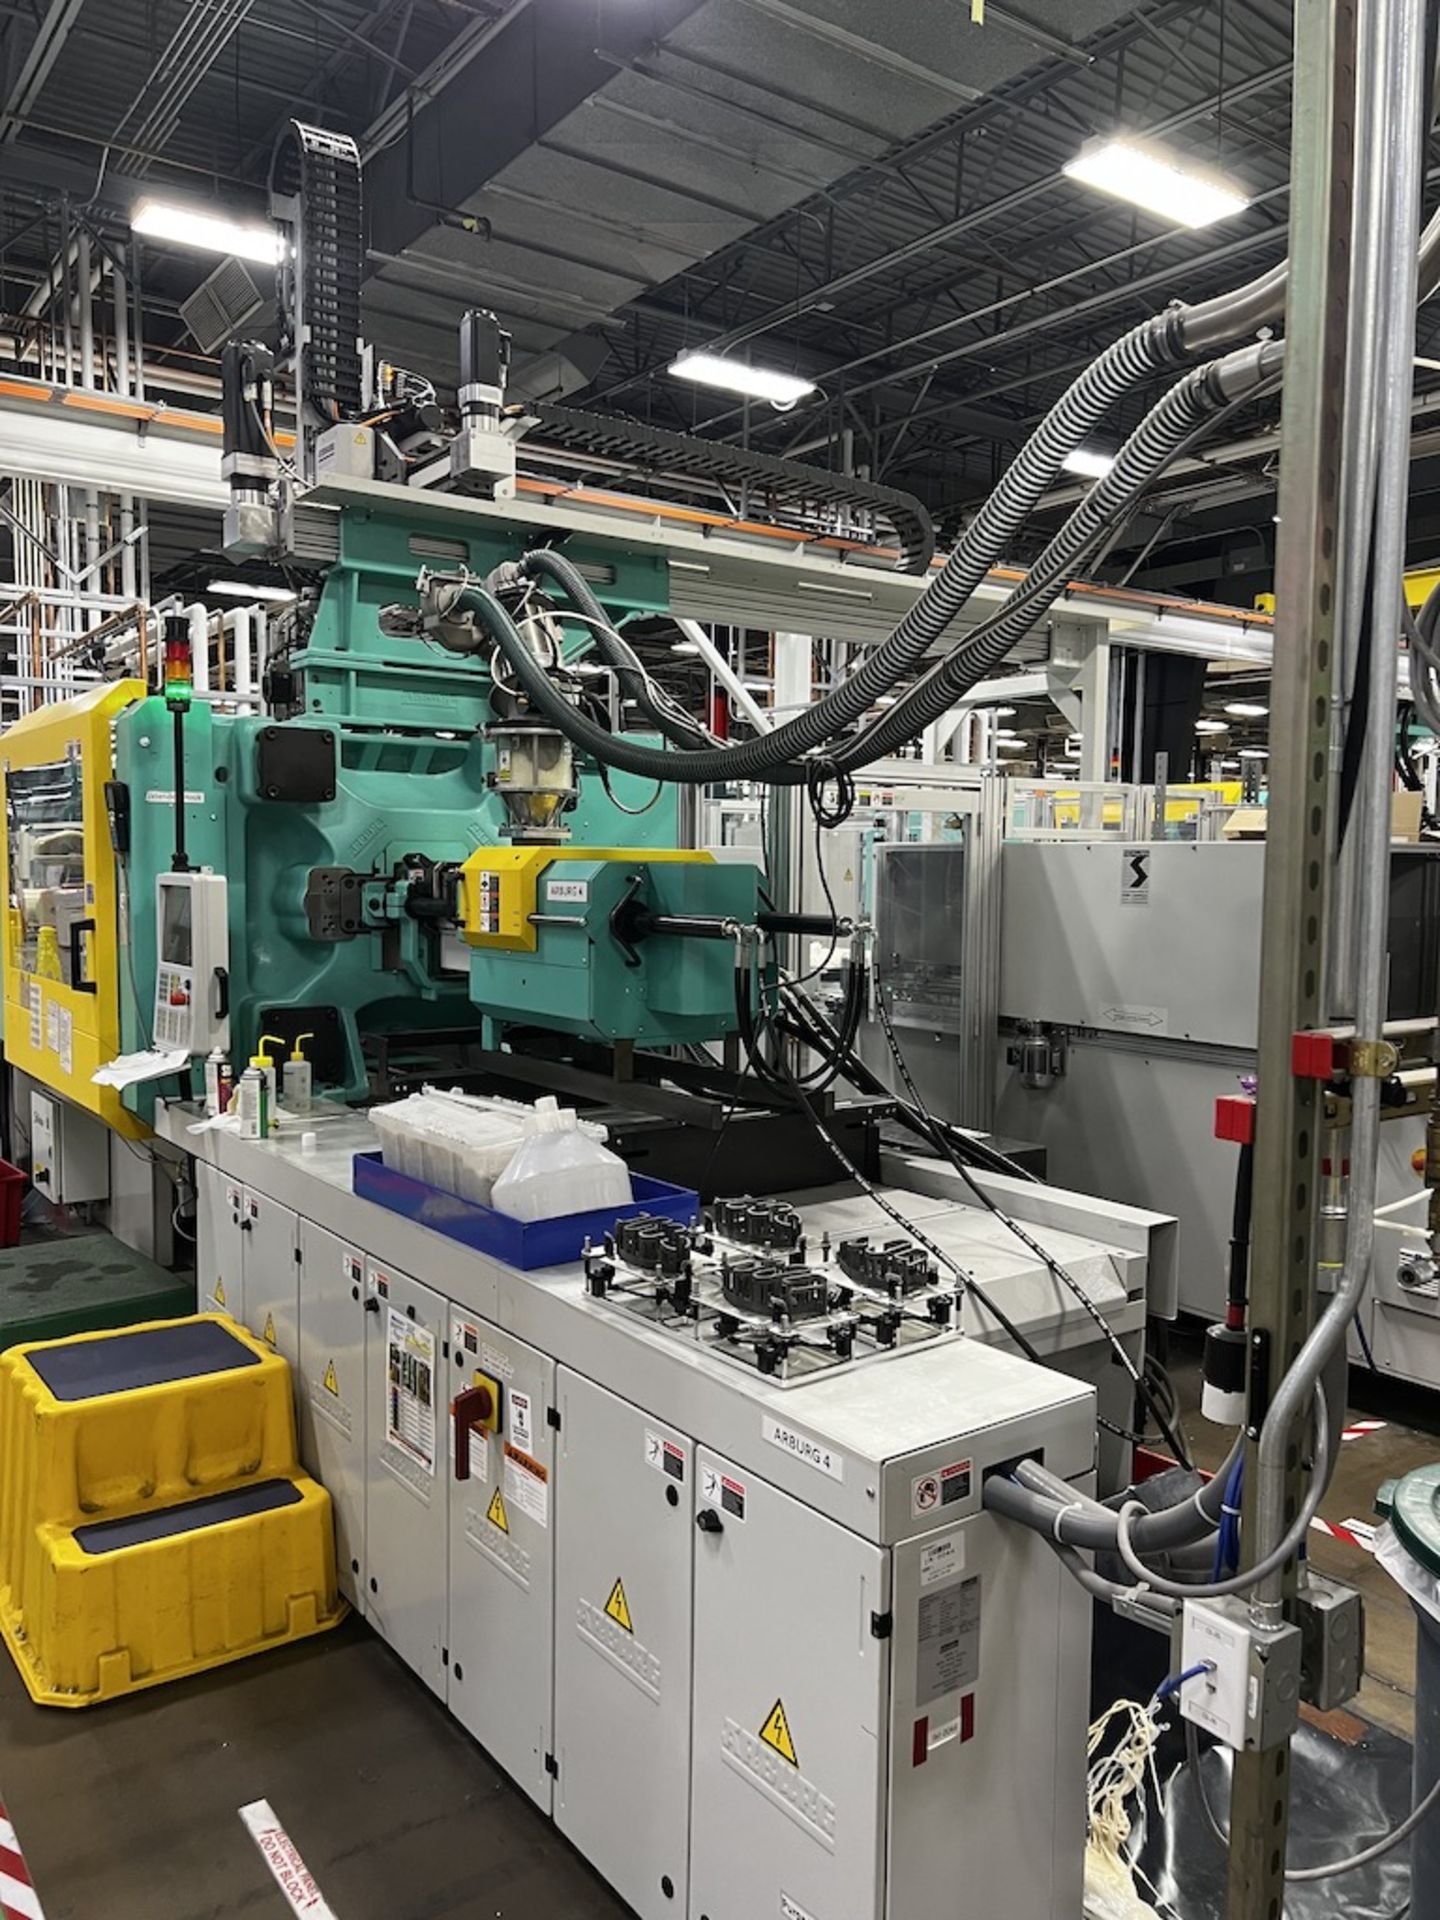 Arburg 320 Ton Injection Molding Press w/Integrated Arburg Robot, New in 2014 - Image 2 of 4